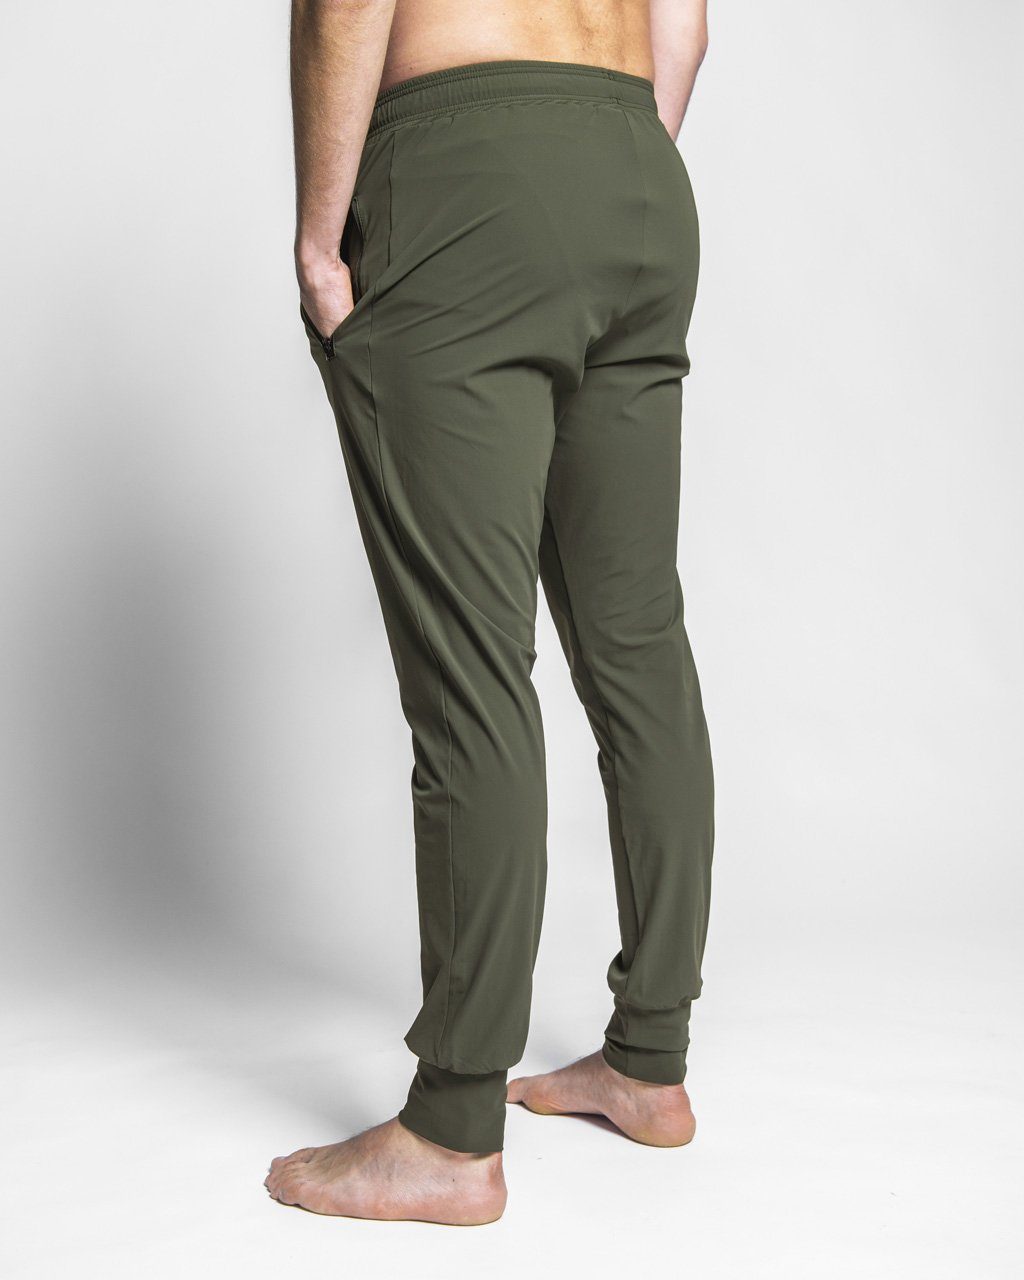 Népra M's Yed Jogger Sports Pants - Recycled Polyamide Army Pants